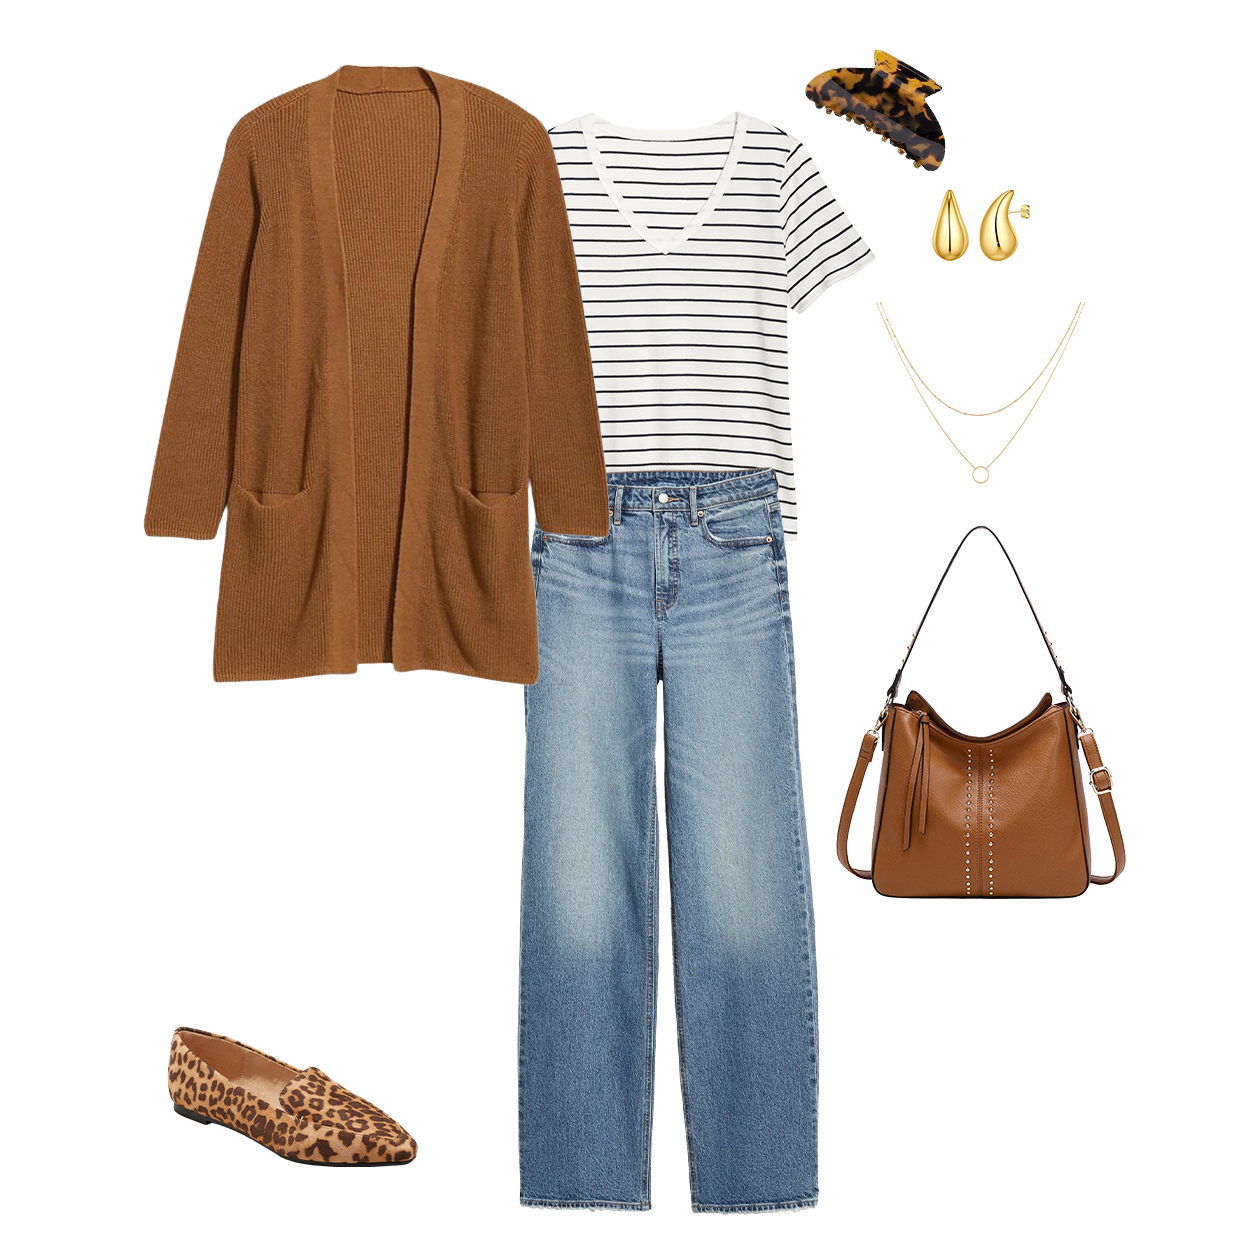 Cute Casual Fall Outfit: Solid Color Cardigan + Striped Top + Medium Wash Jeans + Leopard Shoes 